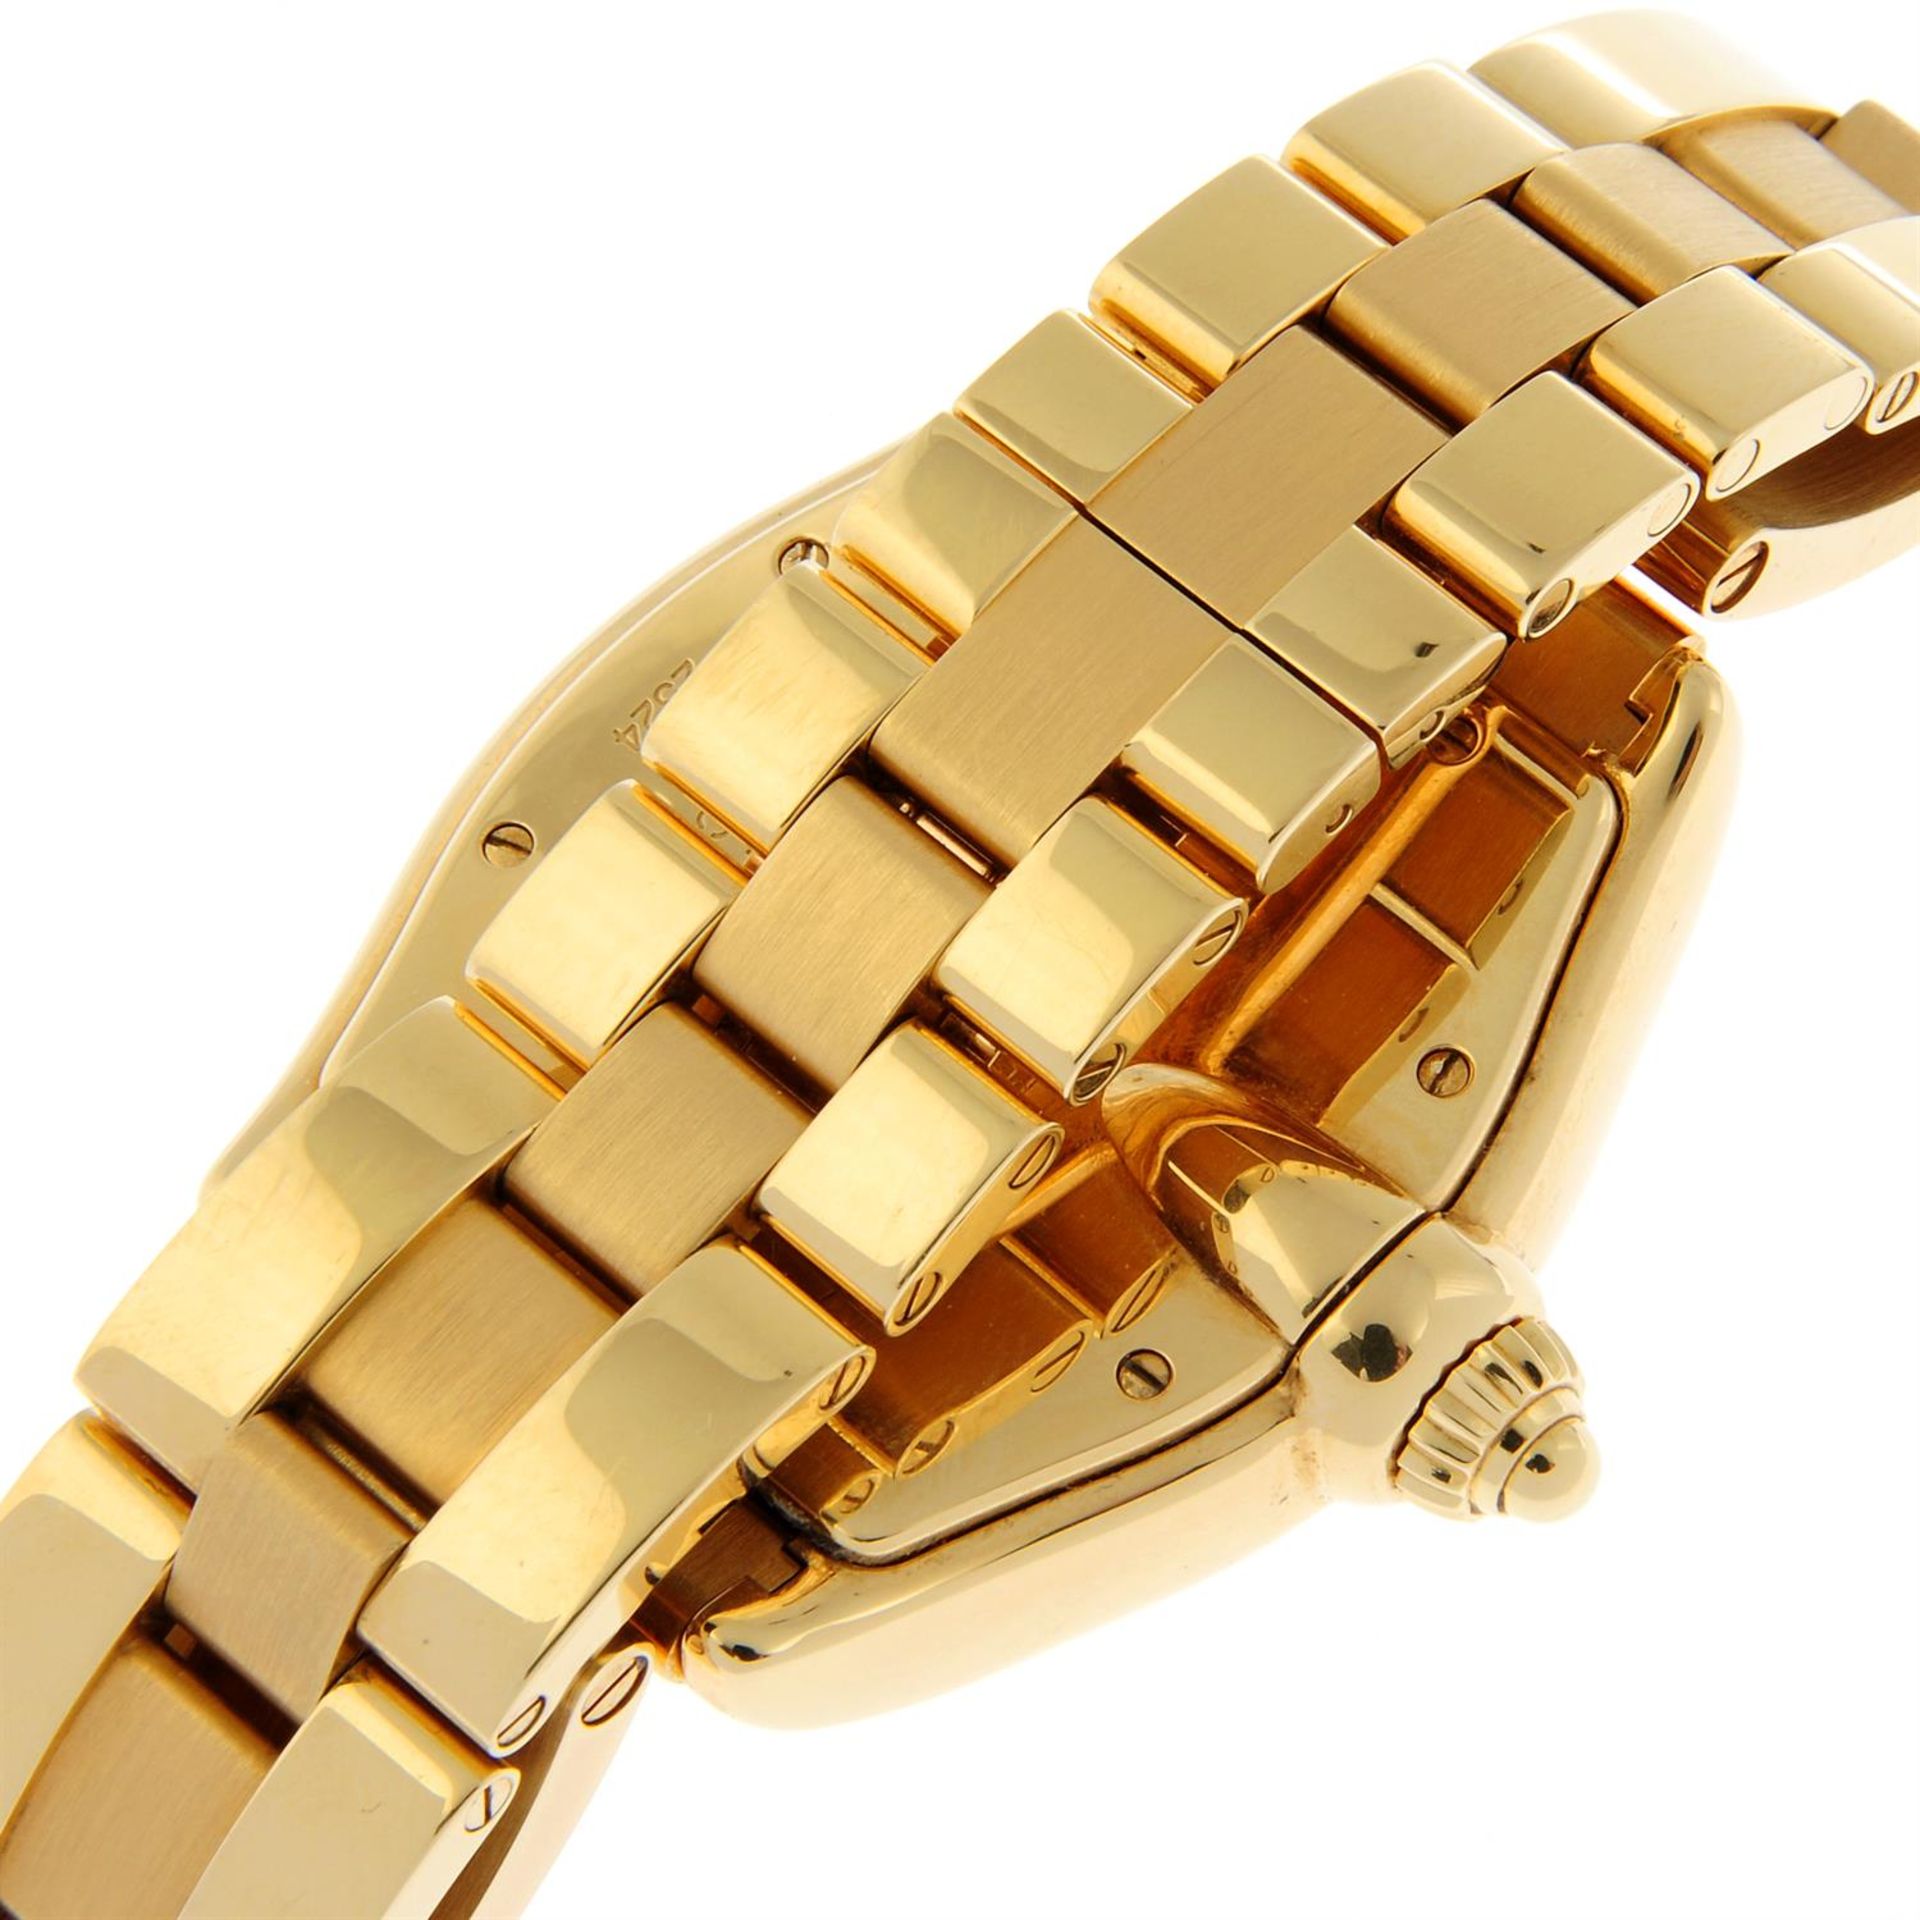 CARTIER - an 18ct yellow gold Roadster bracelet watch, 38mm. - Image 2 of 9